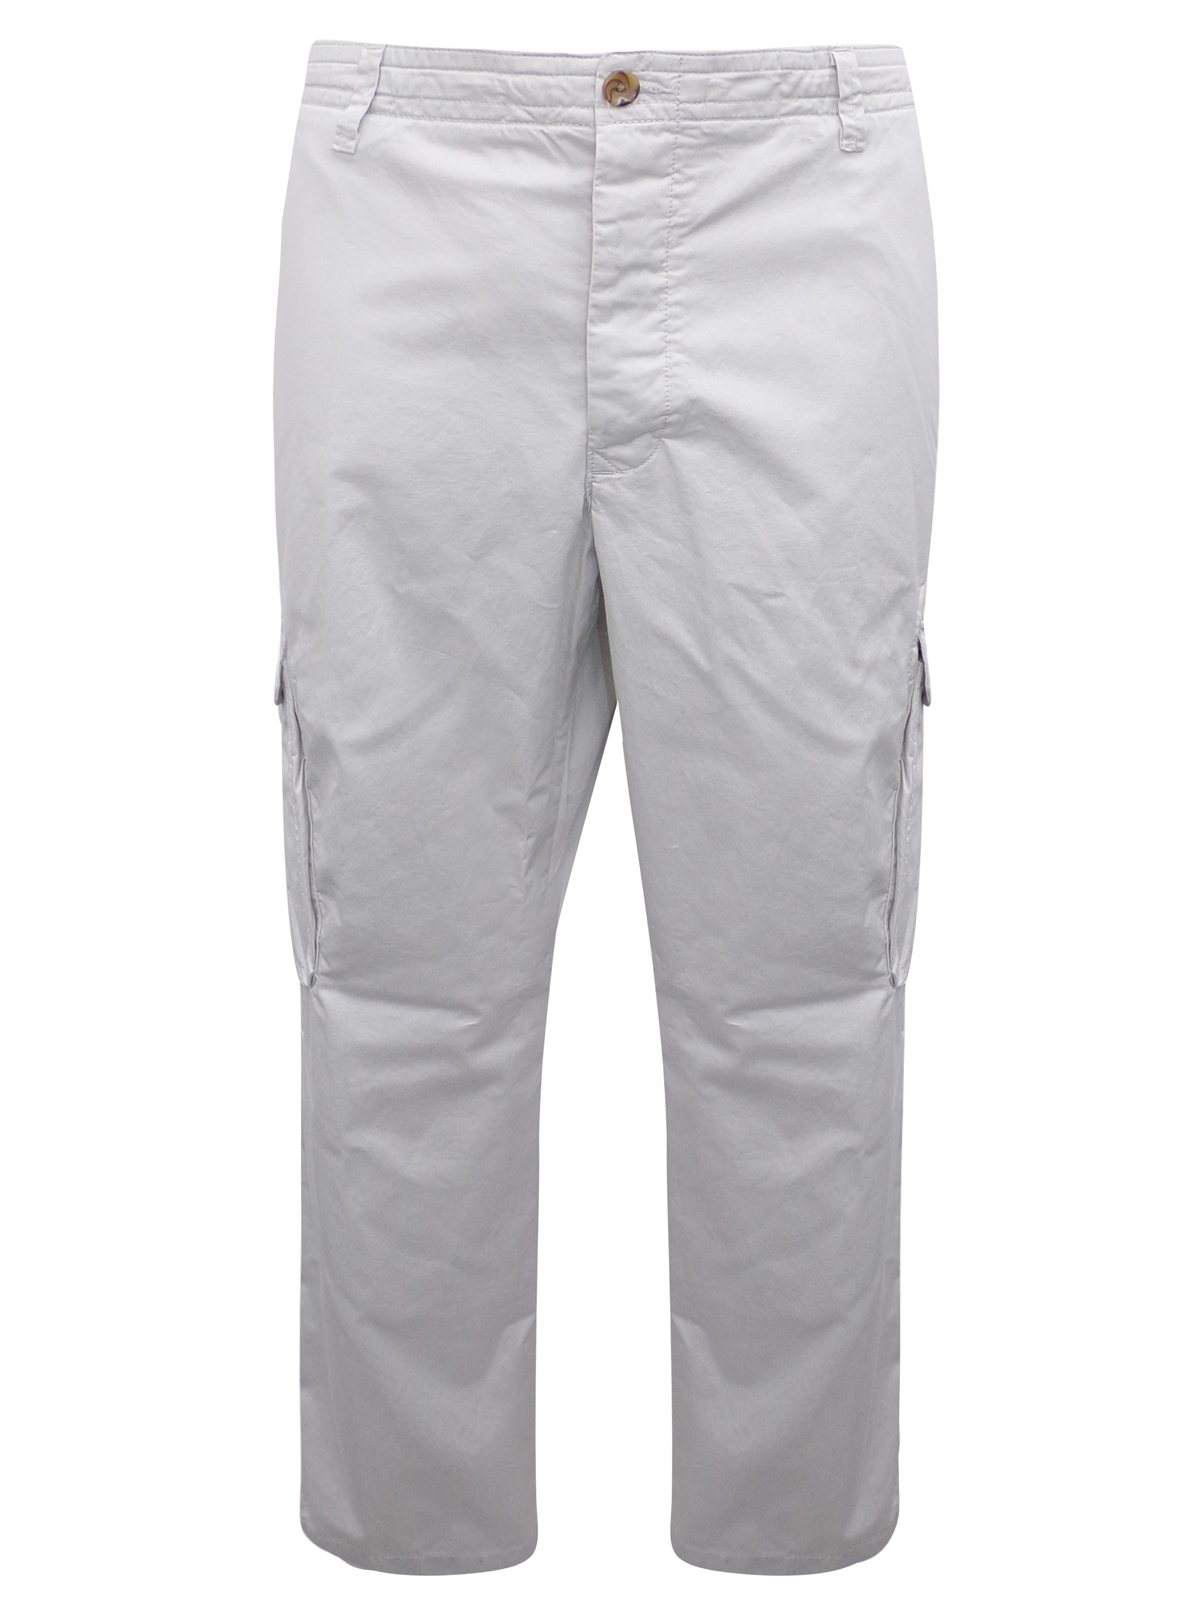 Marks and Spencer - - M&5 STONE Pure Cotton Utility Cargo Trousers ...